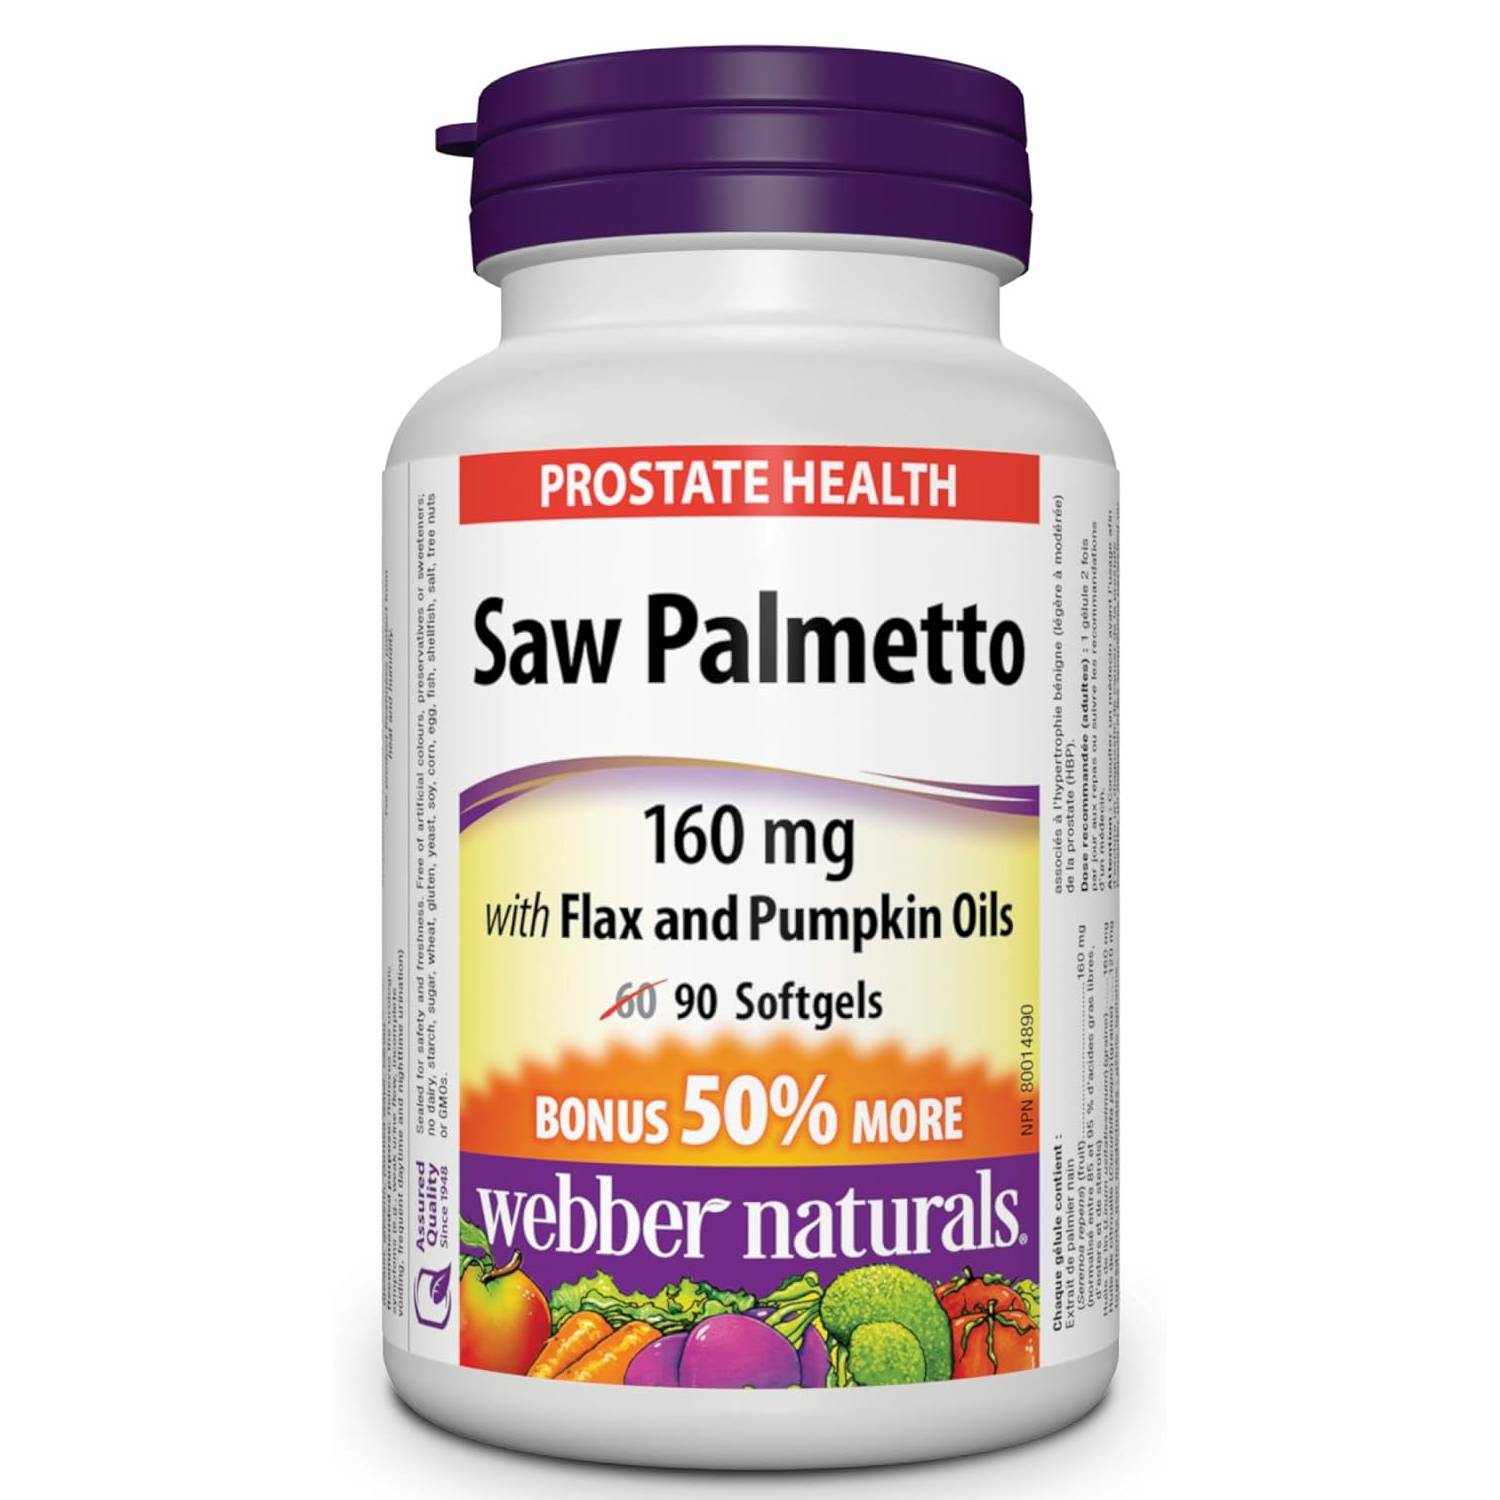 Webber Naturals Saw Palmetto with Flax and Pumpkin Oils 160 mg 90 Softgels